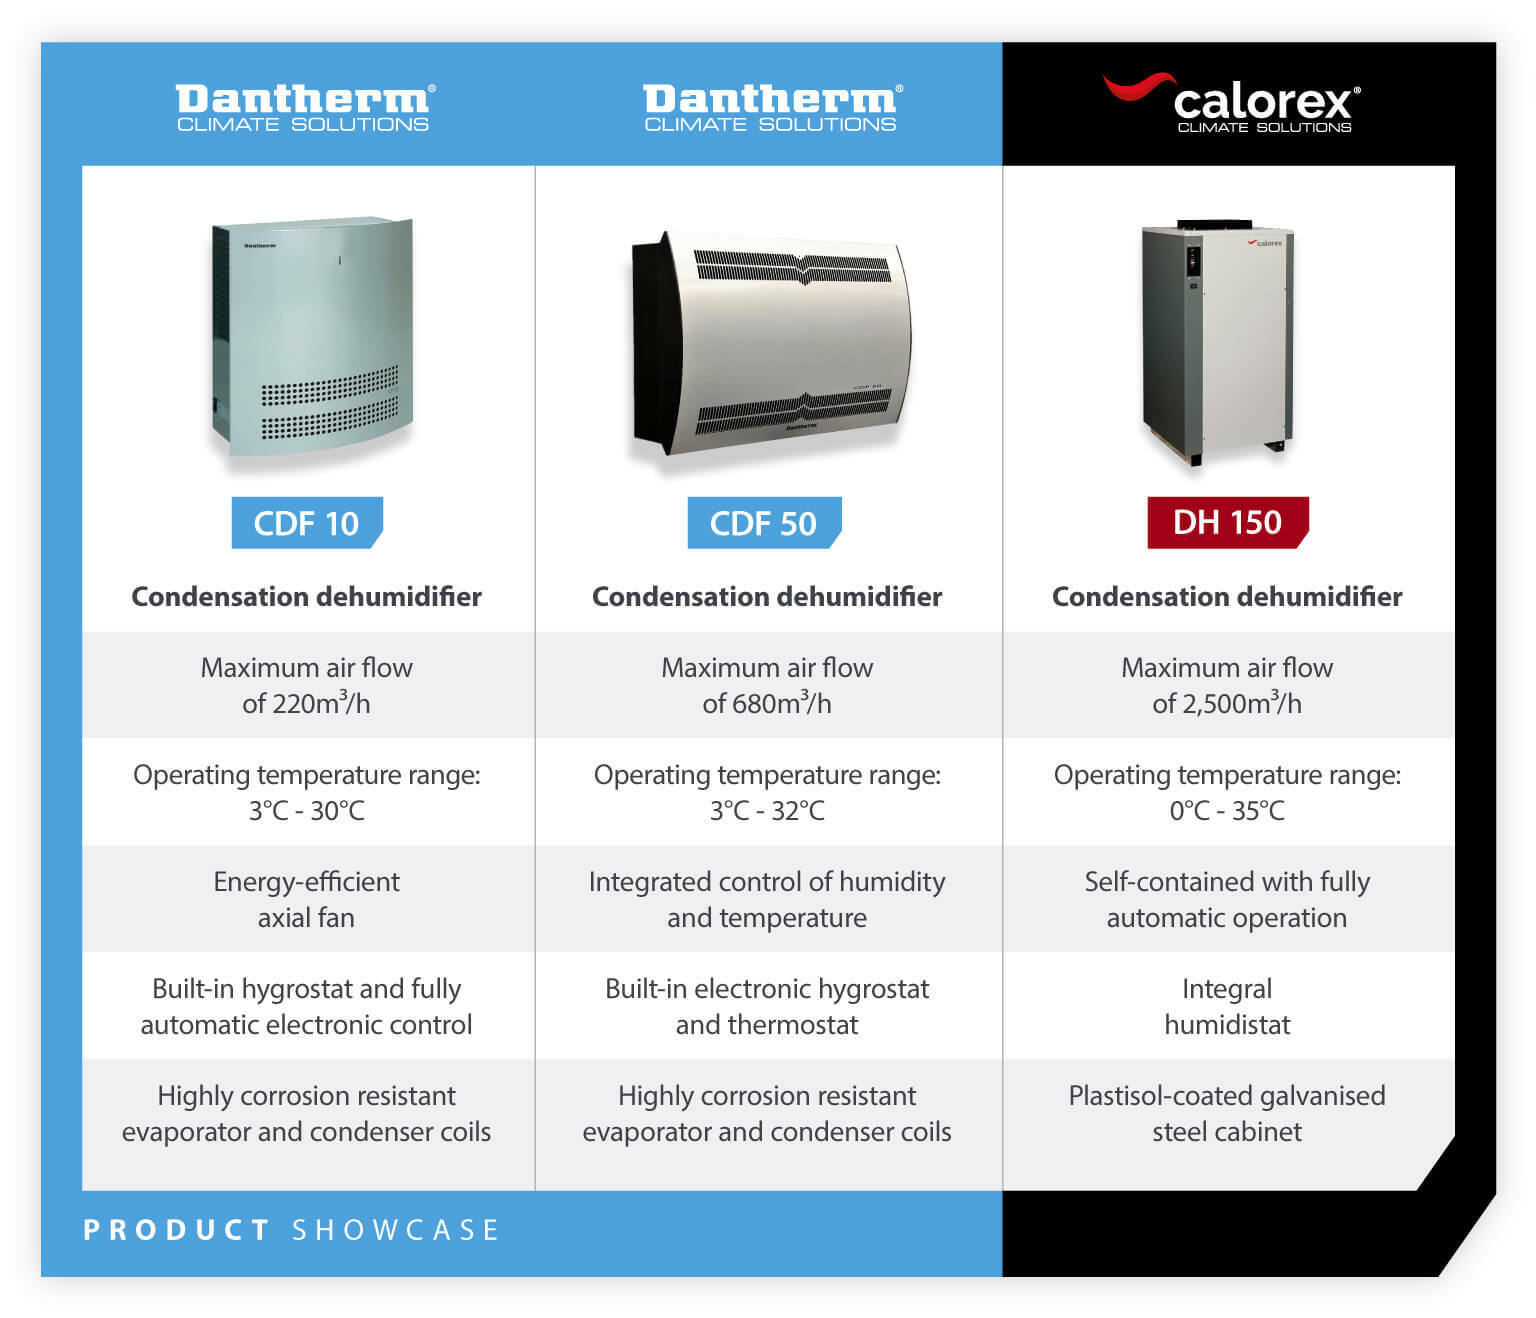 Product showcase of commercial dehumidifiers used for vertical farming - infographic image